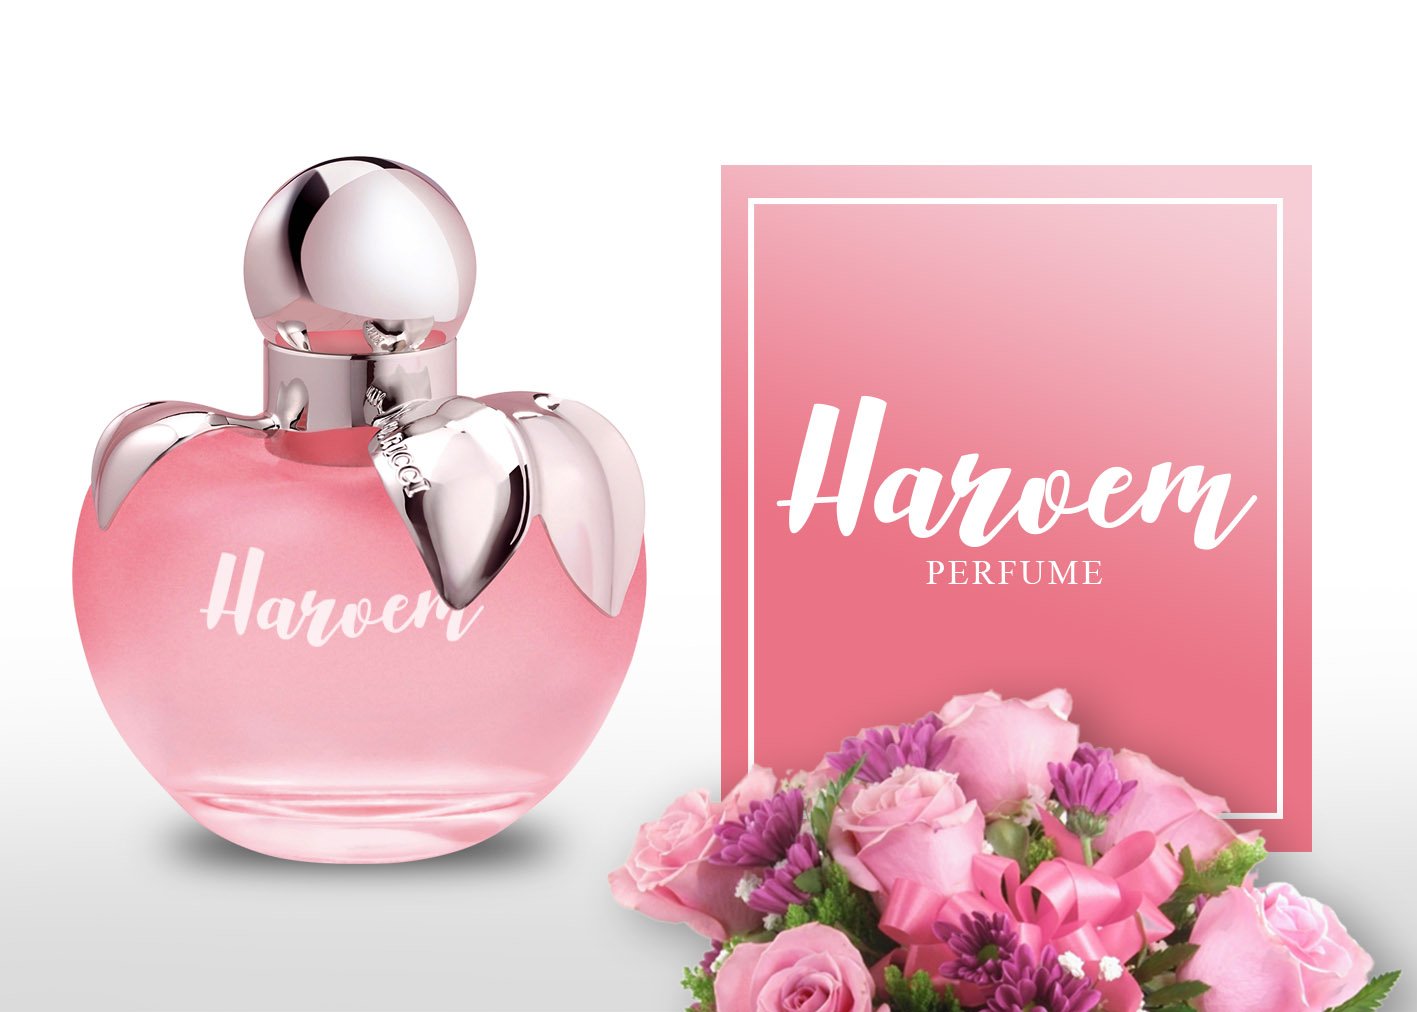 This font is perfect for preim perfume.